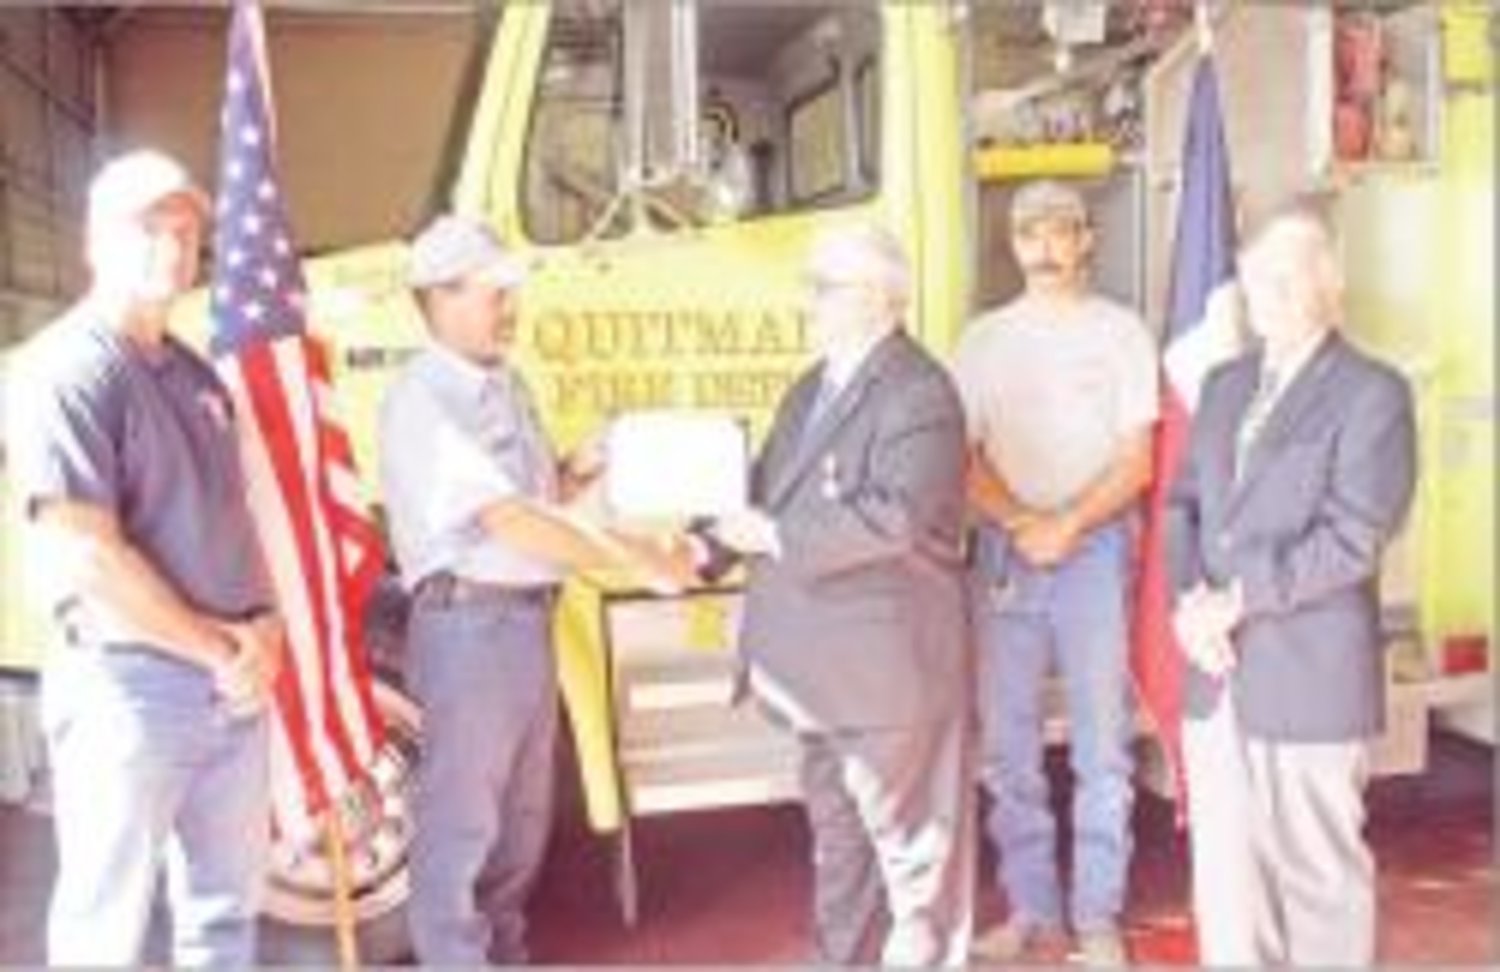 The Sons of the American Revolution Athens Chapter 54 recognized the Quitman Volunteer fire Department recently for outstanding service to the community. Pictured here (left to right) Firefighter Shaun Richey, Fire Chief Scott Wheeler, SAR leader Gene Pilgrim, Firefighter Mike Gilmore and SAR representative Charles Luna.